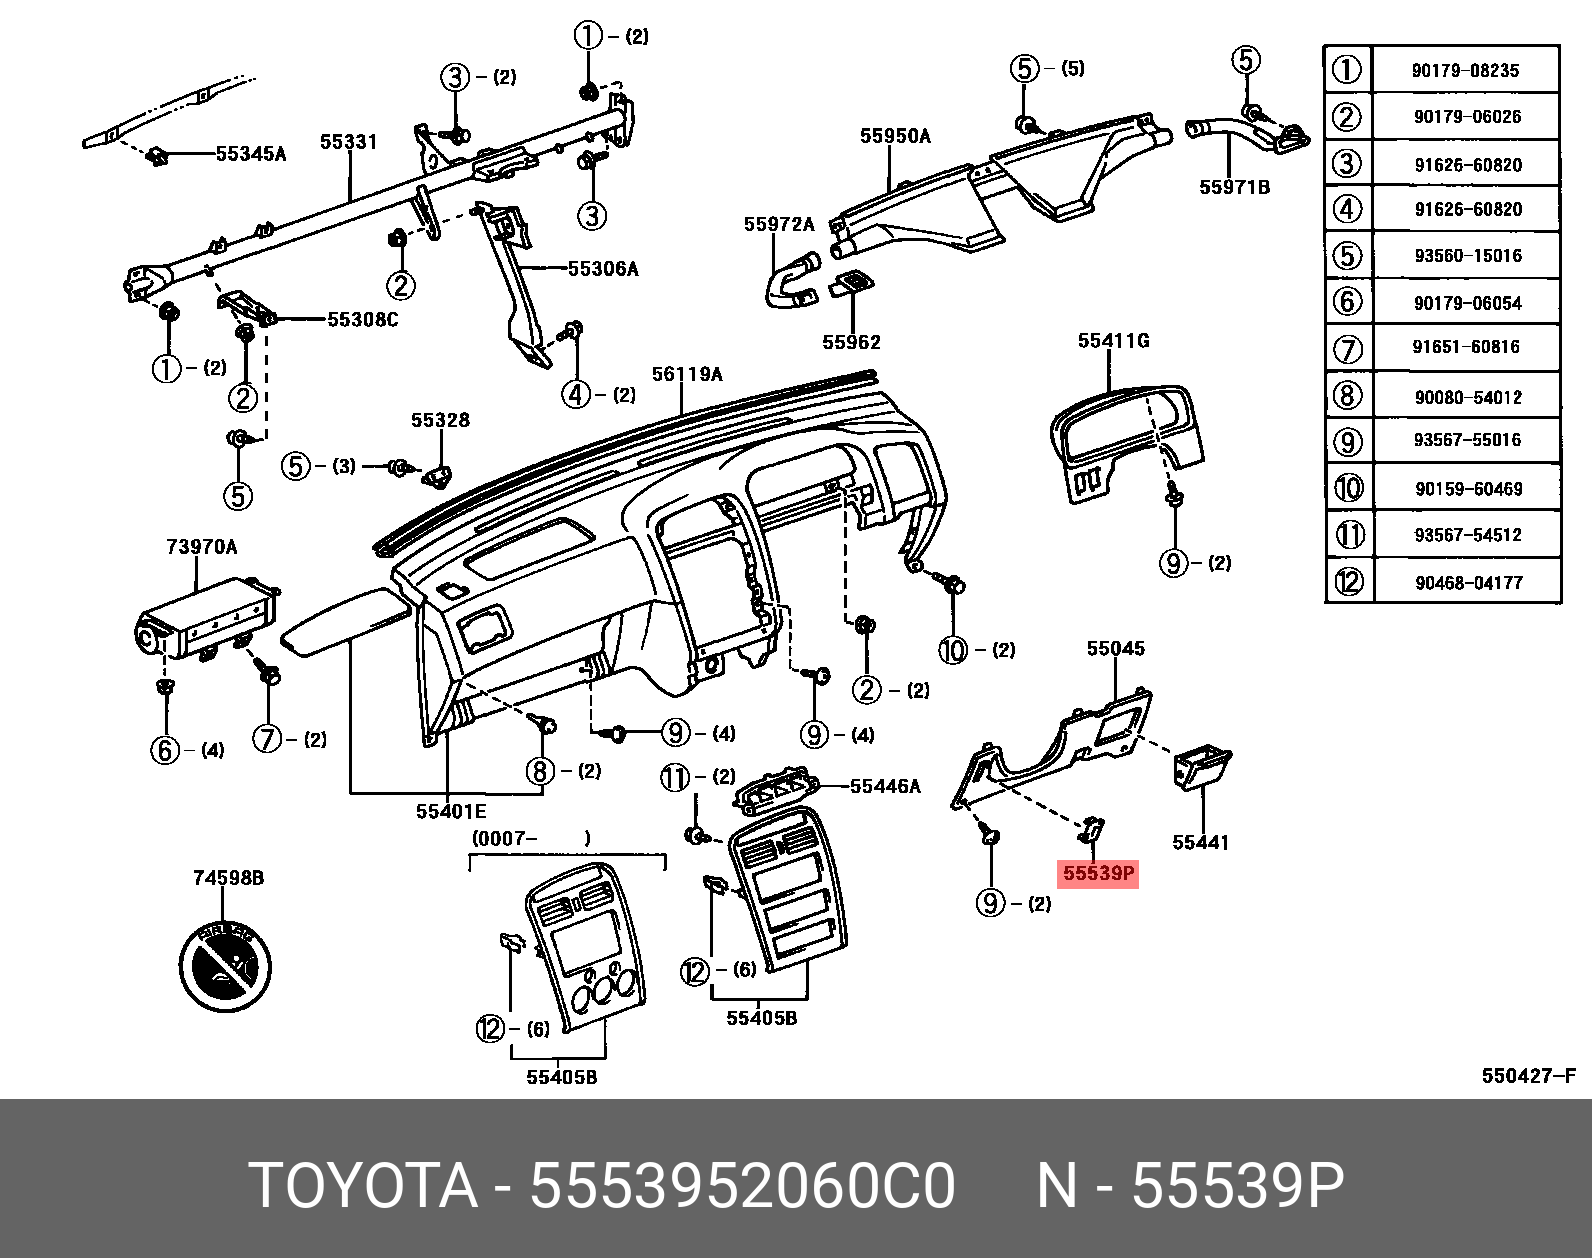 CAMRY HYBRID 201108 - 201704, COVER, SPARE SWITCH HOLE